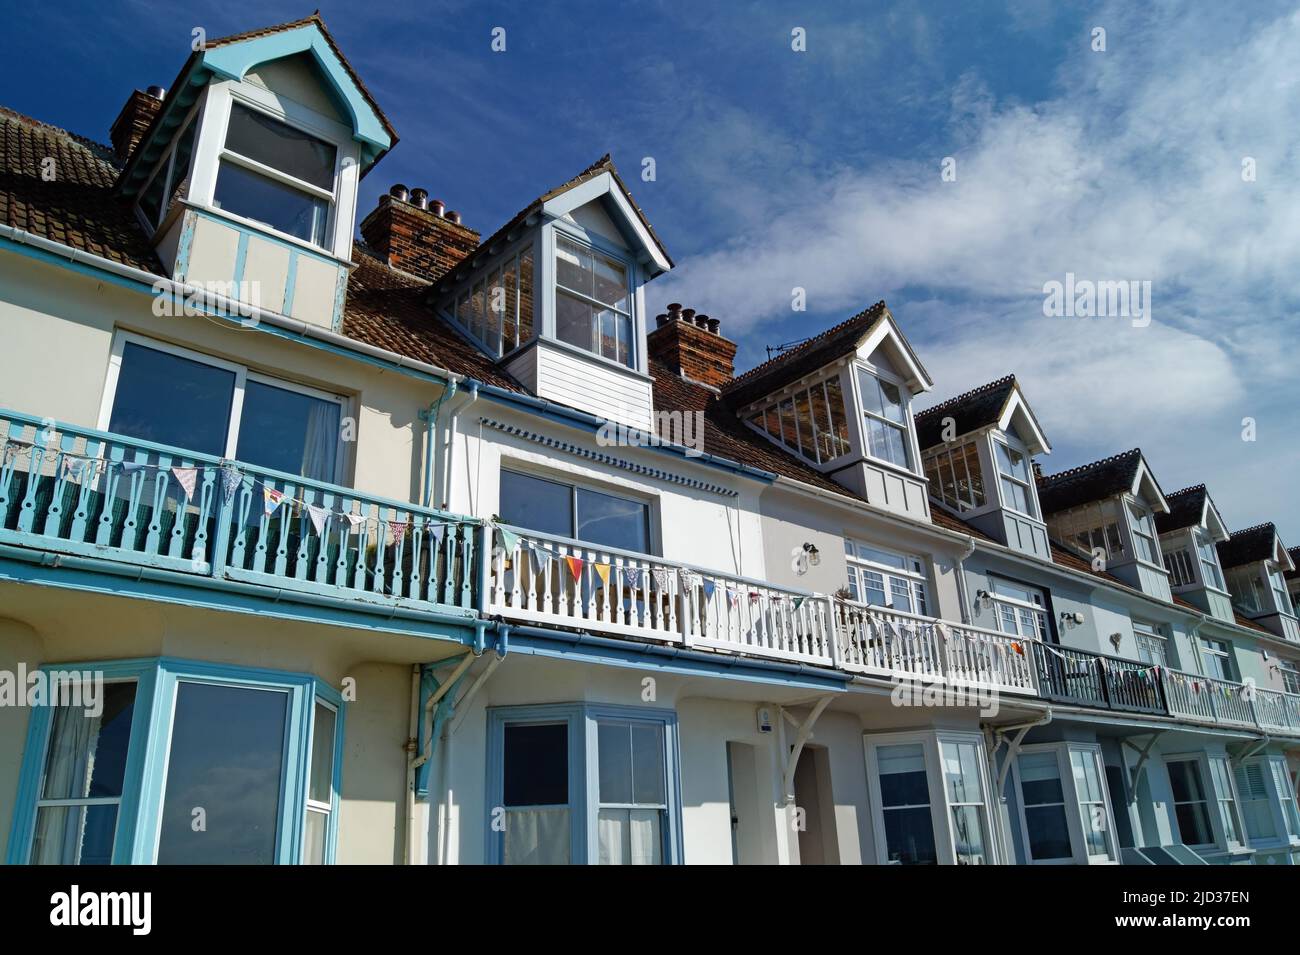 UK, Kent, Whitstable Seafront Houses Stock Photo